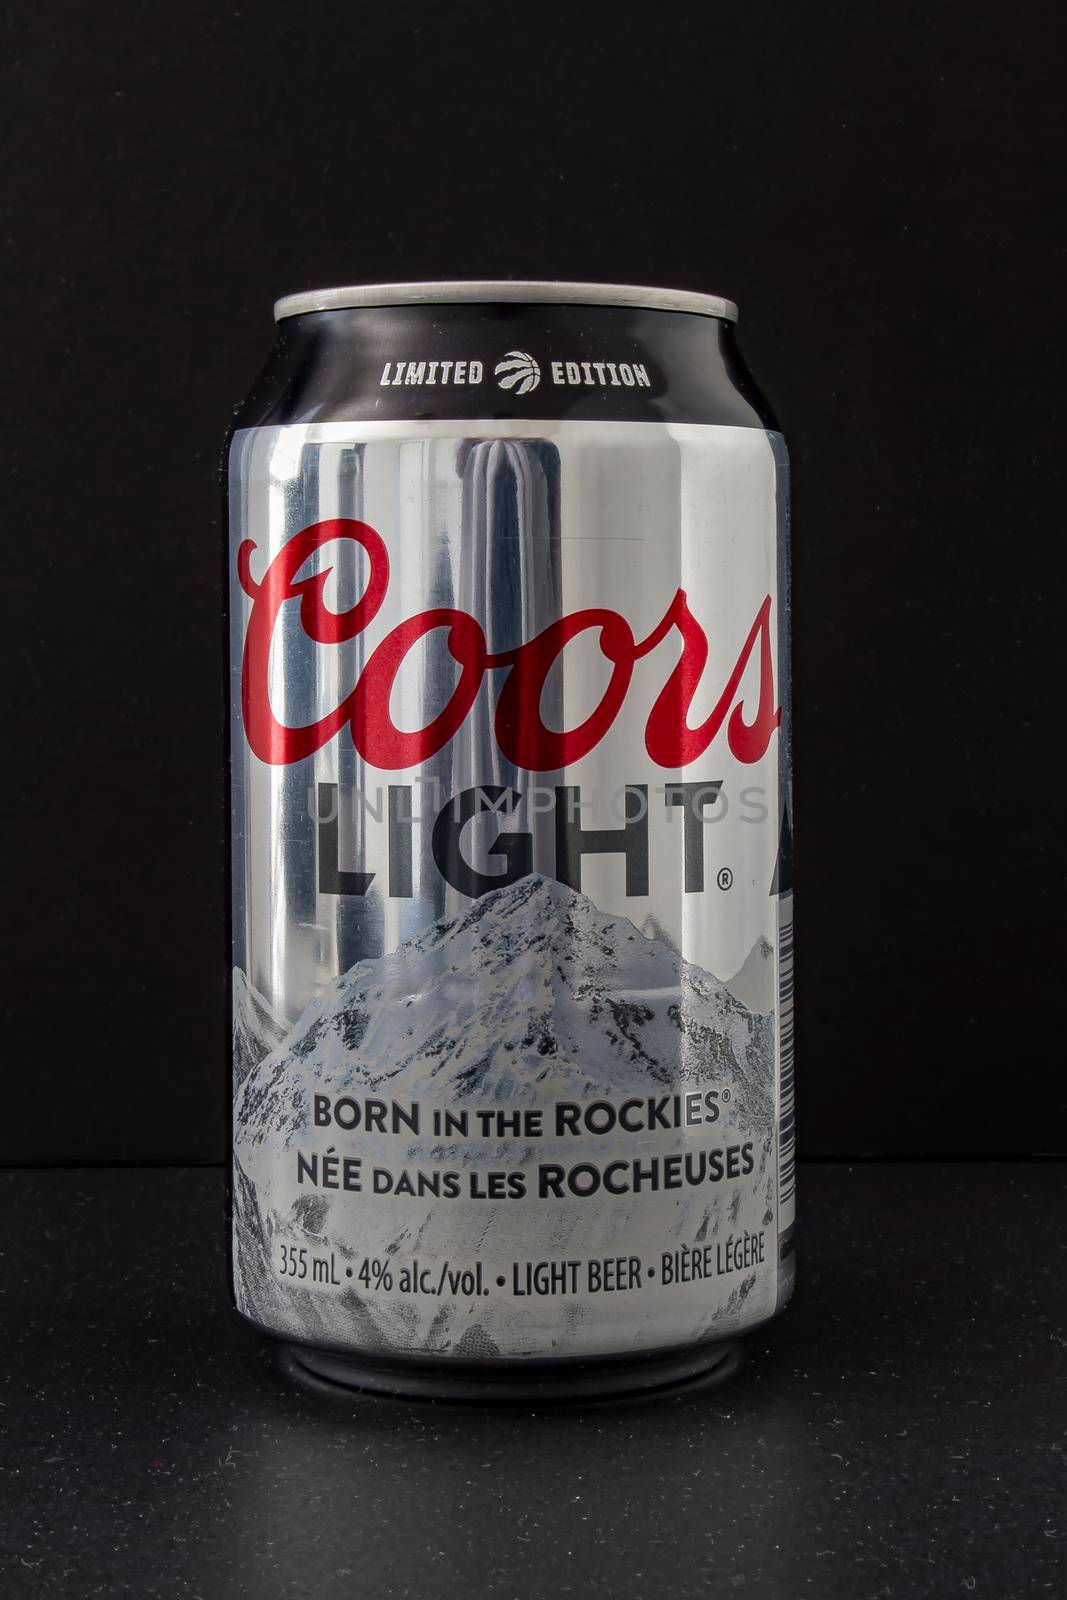 A beer can of Coors Light special edition silver can raptors, on a black background by oasisamuel